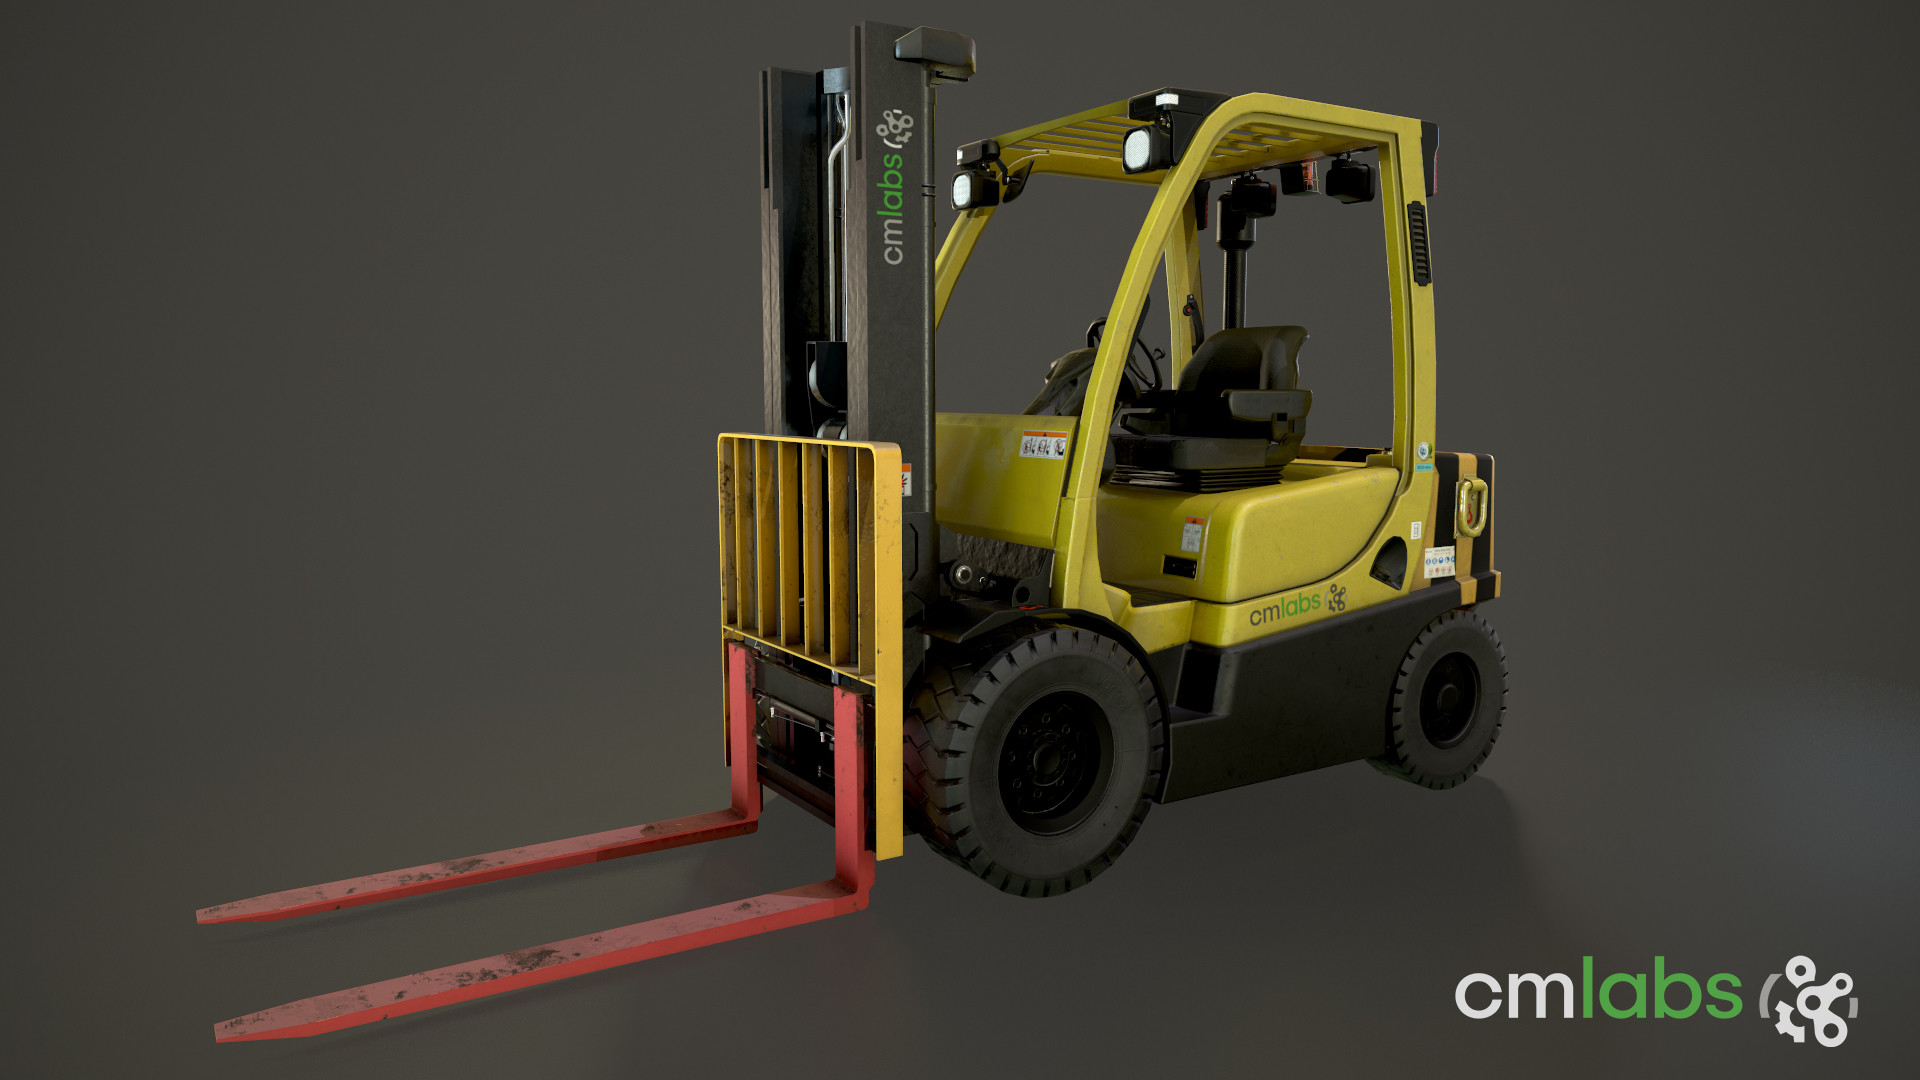 Forklift Training and Certification with CM Labs